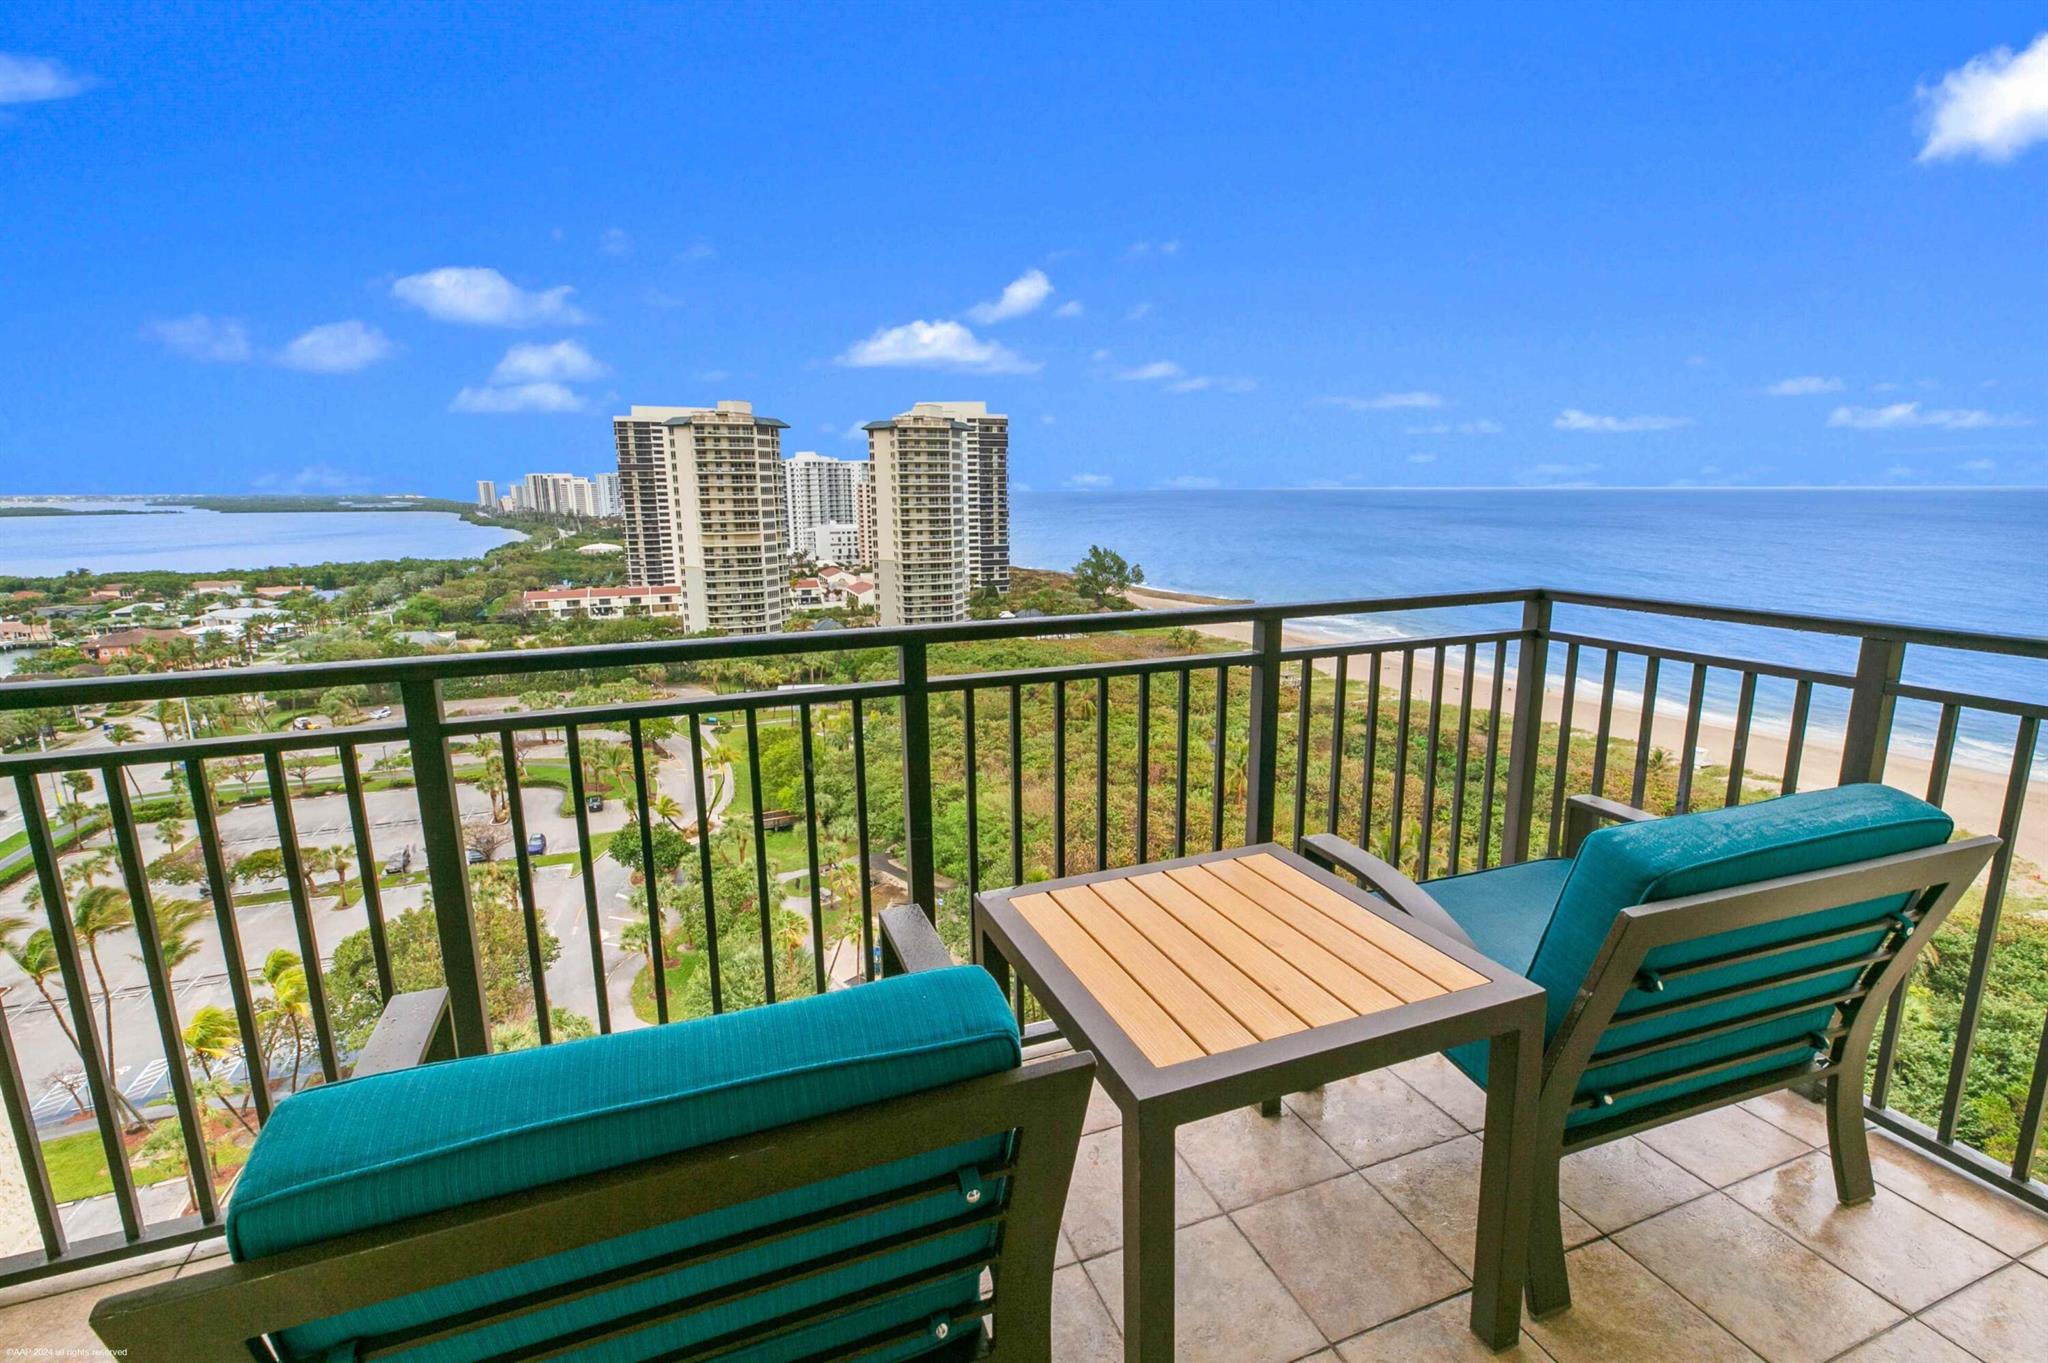 Immerse yourself in the awe-inspiring vistas of the ocean, Intracoastal, & park from this fully furnished 17th-floor 1-bedroom, 1-bath condo (with special terrace). Experience luxury with top-of-the-line appliances, marble flooring, carpeting, & granite countertops, complemented by world-class amenities & breathtaking views. Whether you desire a family-friendly vacation retreat, a rejuvenating getaway, or a savvy investment on Singer Island, this property has it!Unlock the potential for income by participating in the hotel's rental program, renting independently, or simply moving in to savor the luxury lifestyle firsthand. Featuring 239 all-suite units & 66 residential condominiums, the Resort presents 4,000 sq. ft. of meeting space, an 8,500-sq. ft. spa, & an array of amenities